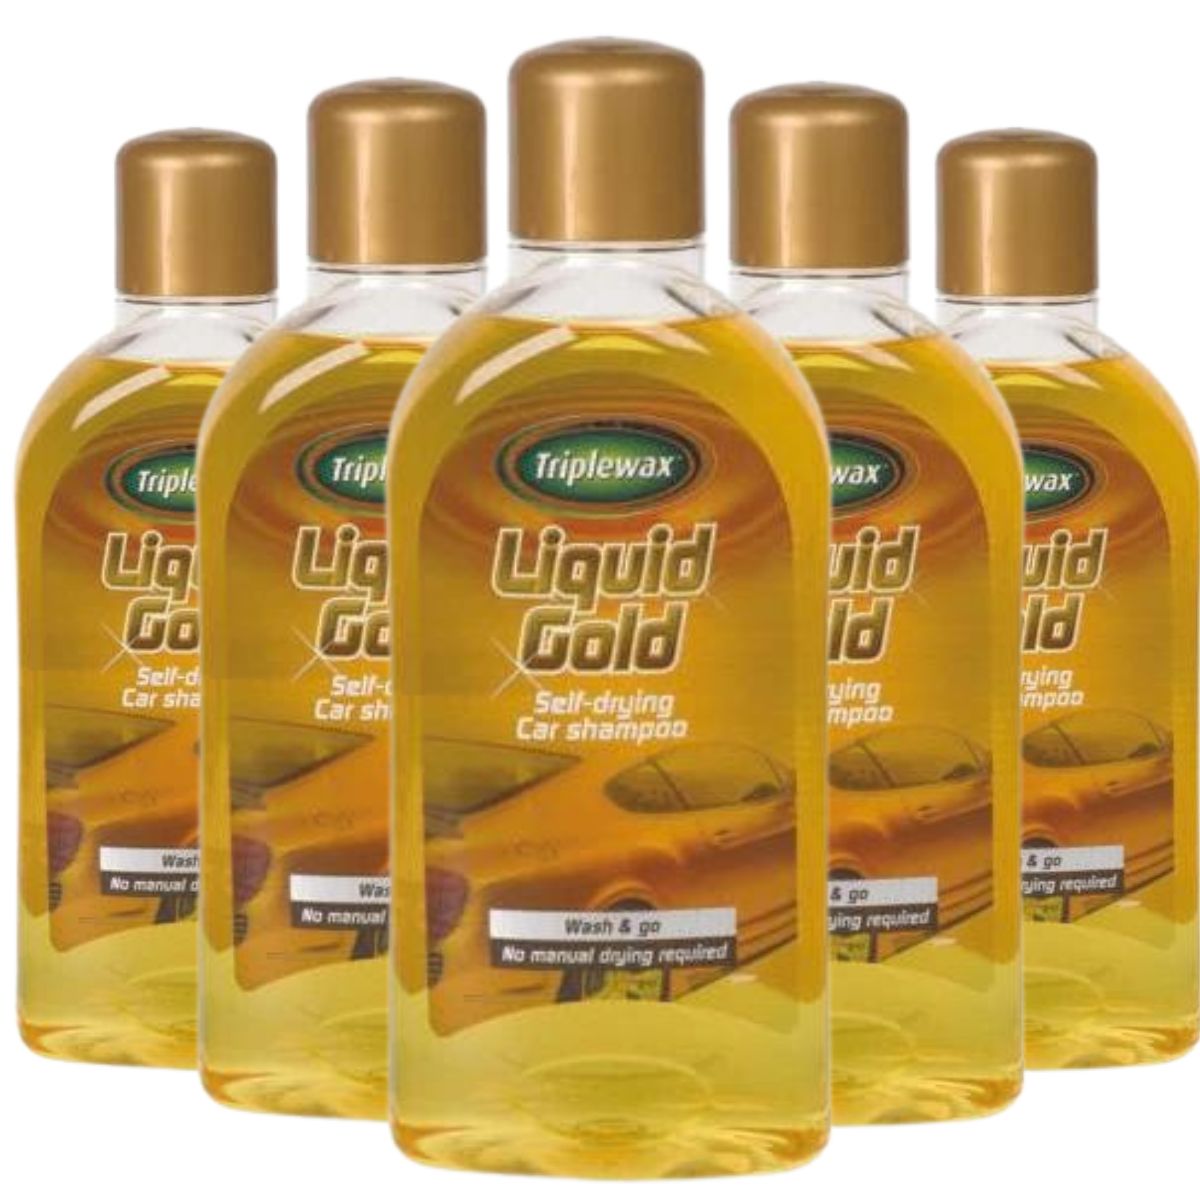 Triplewax Liquid Gold Self Drying Shampoo - 1 litre - South East Clearance Centre